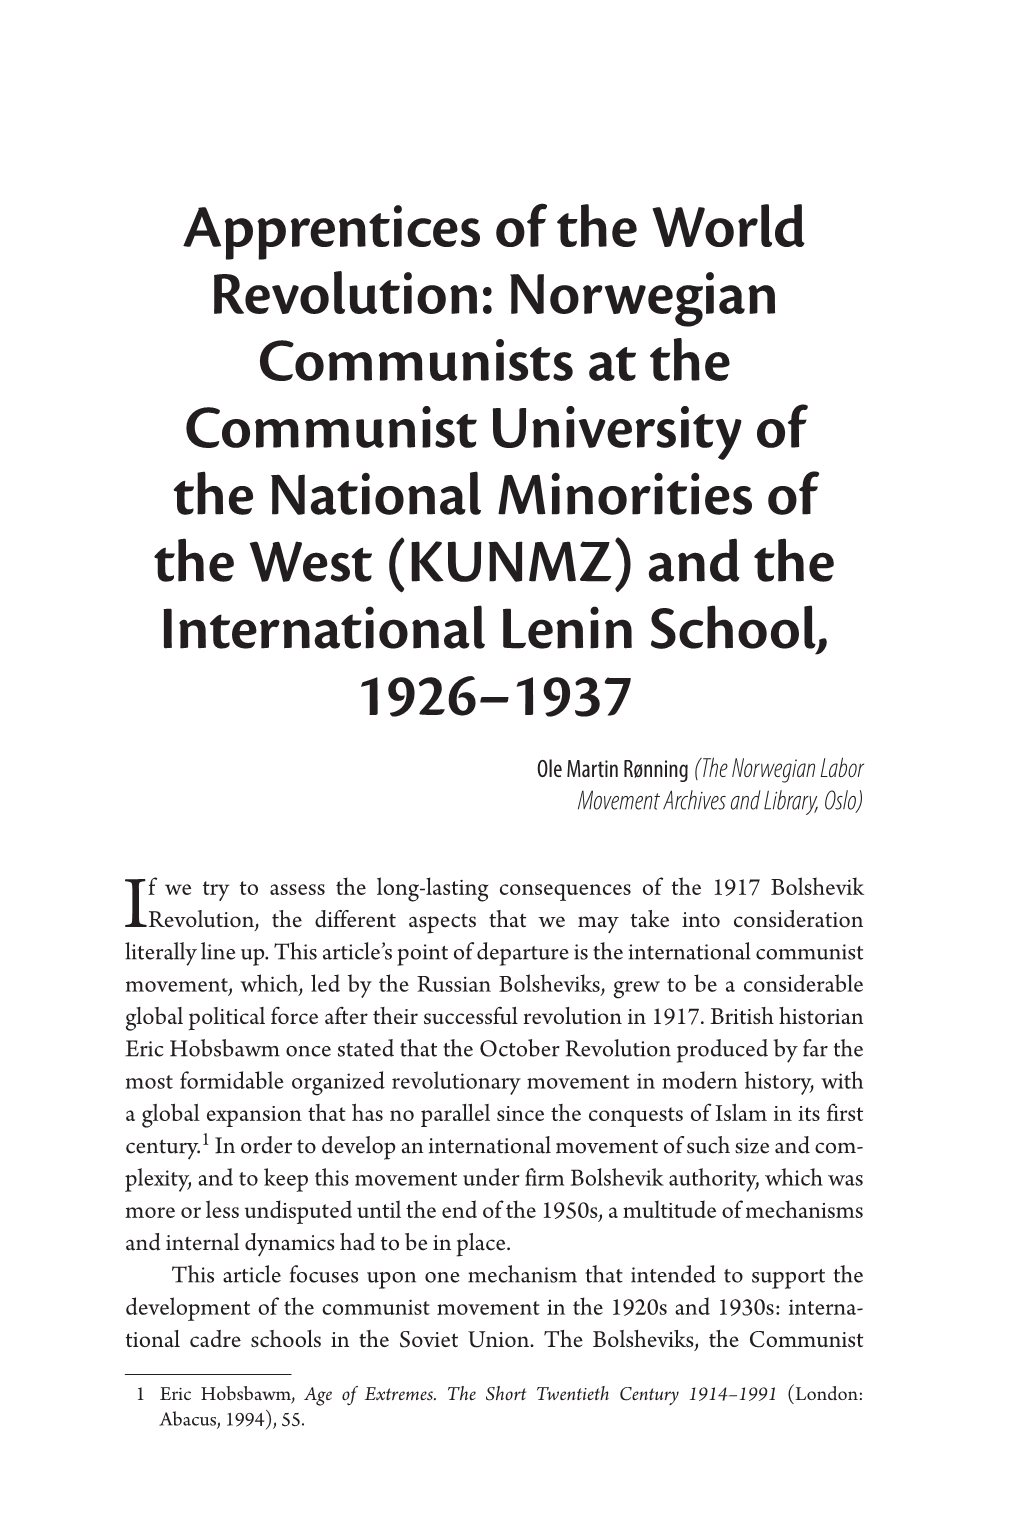 Apprentices of the World Revolution: Norwegian Communists at the Communist University of the National Minorities of the West